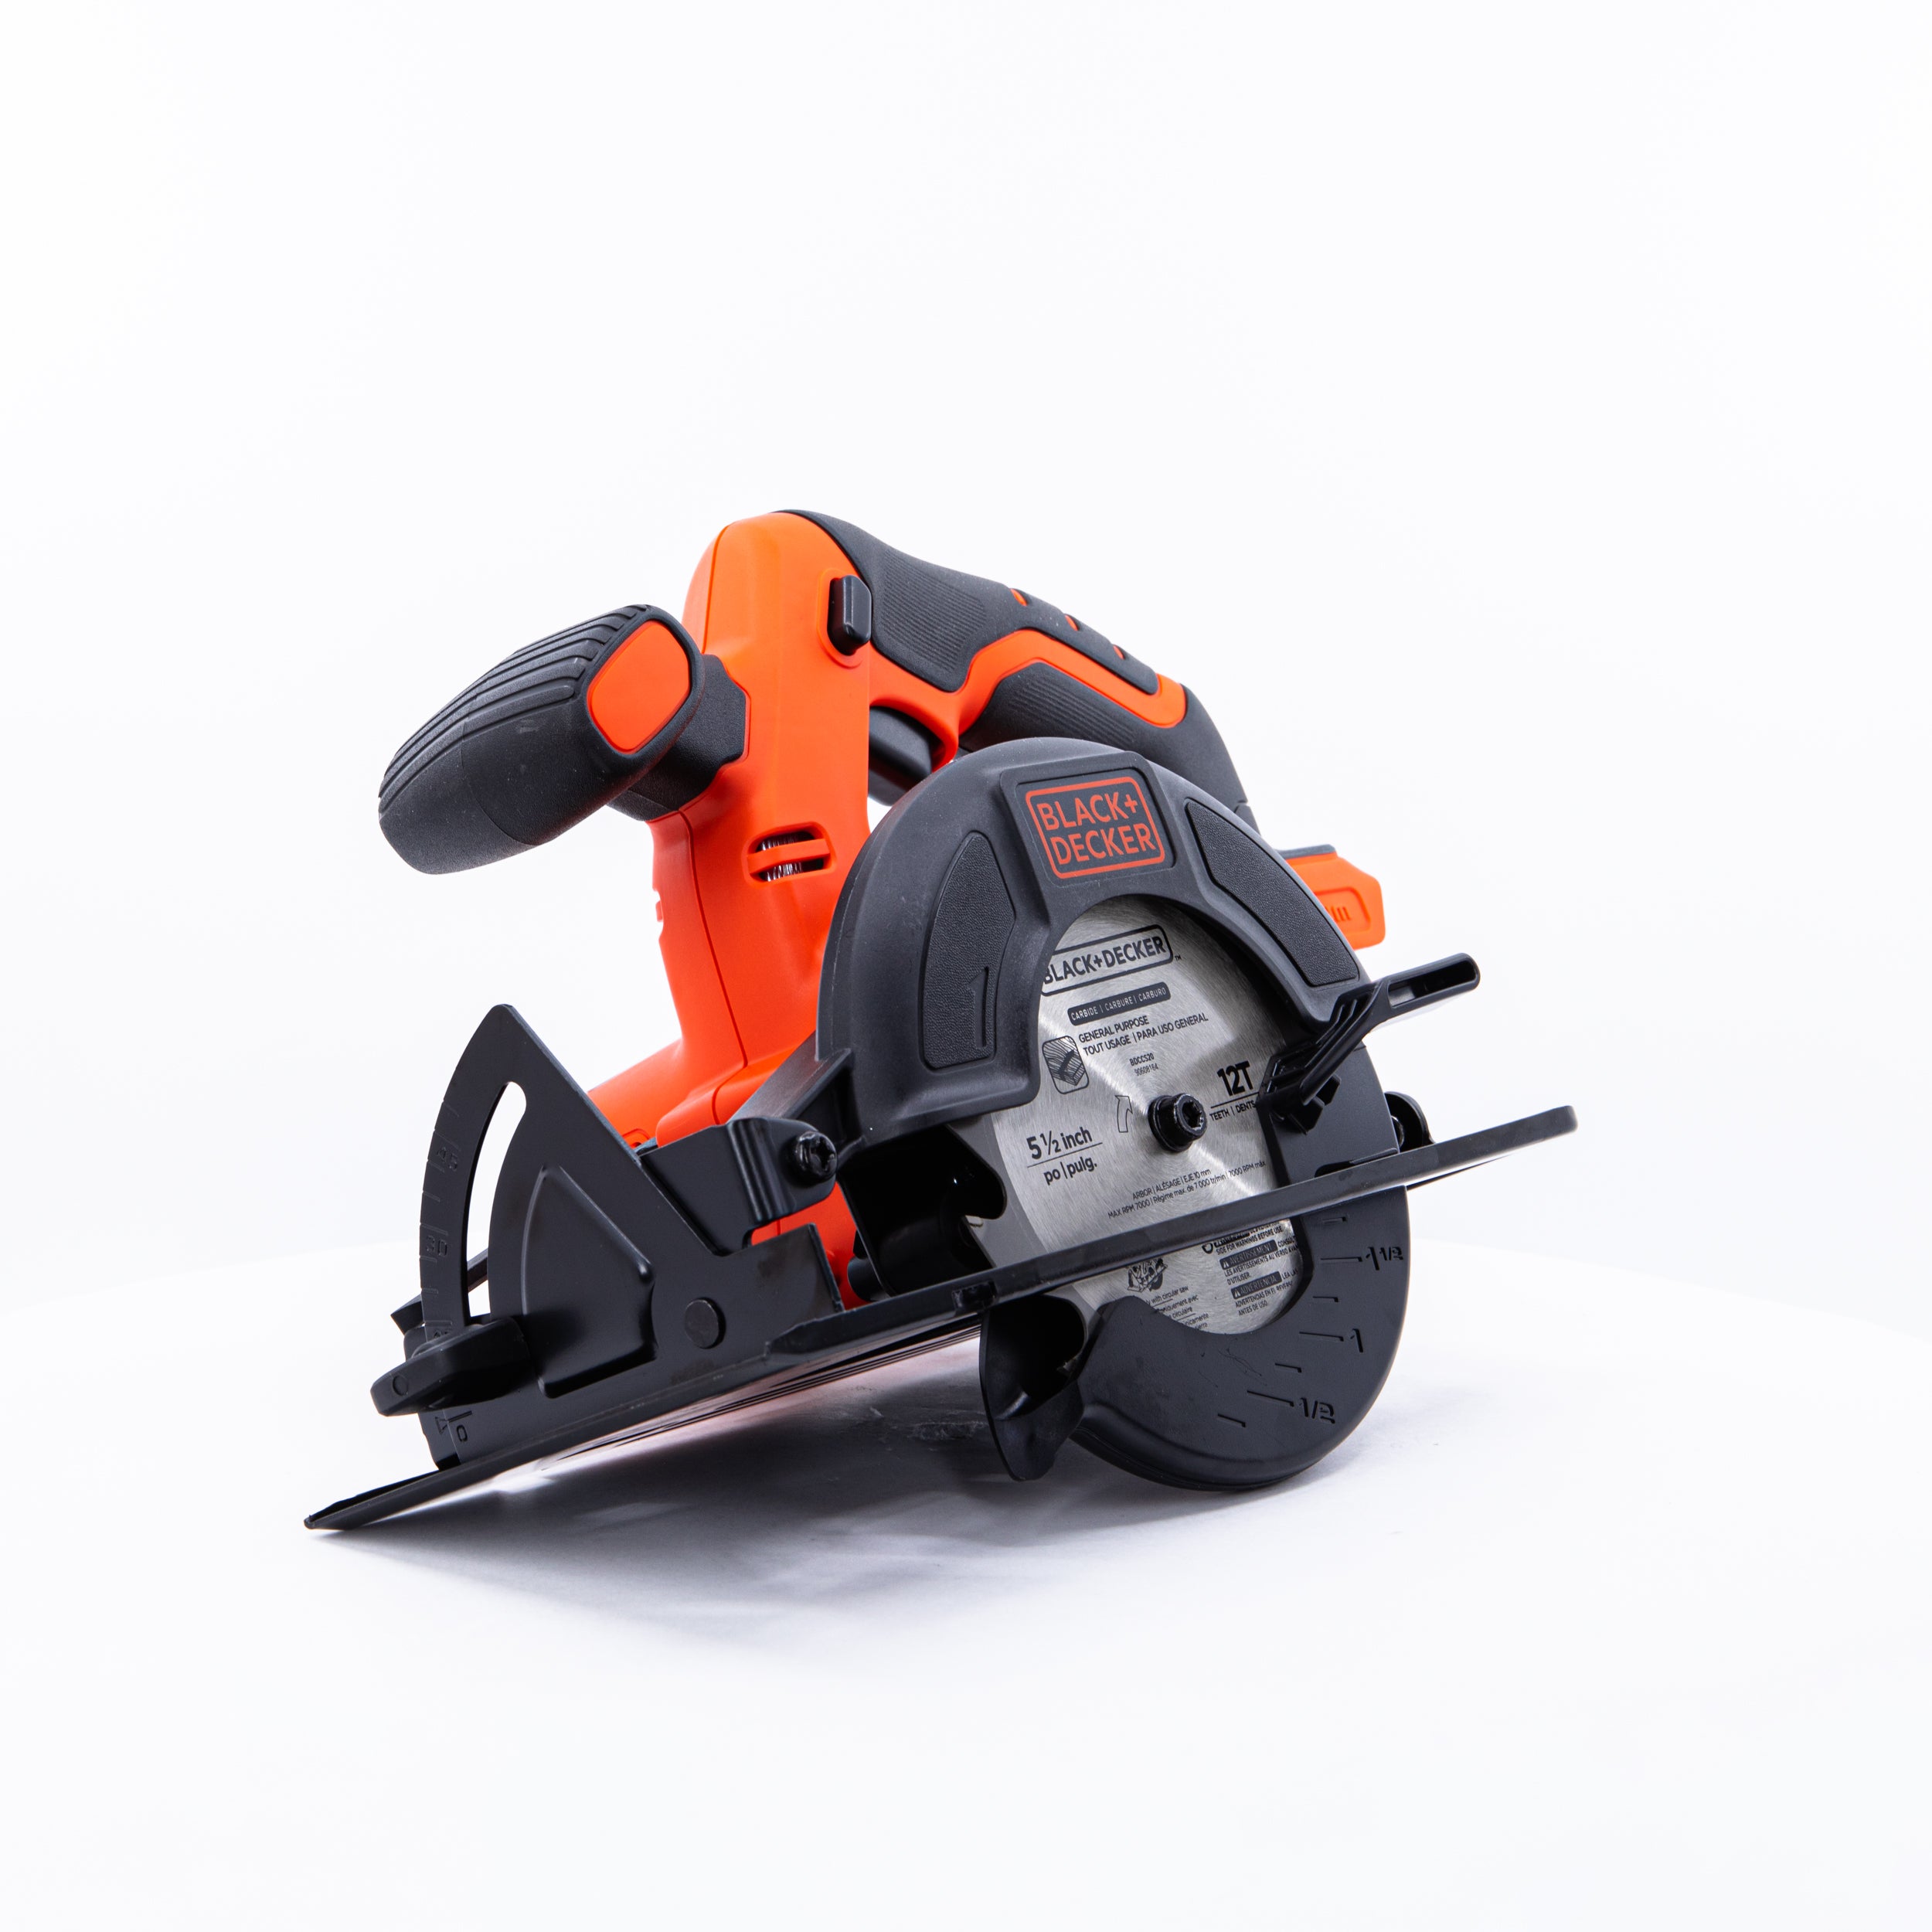 20V Max* Powerconnect 5-1/2 In. Cordless Circular Saw, Tool Only